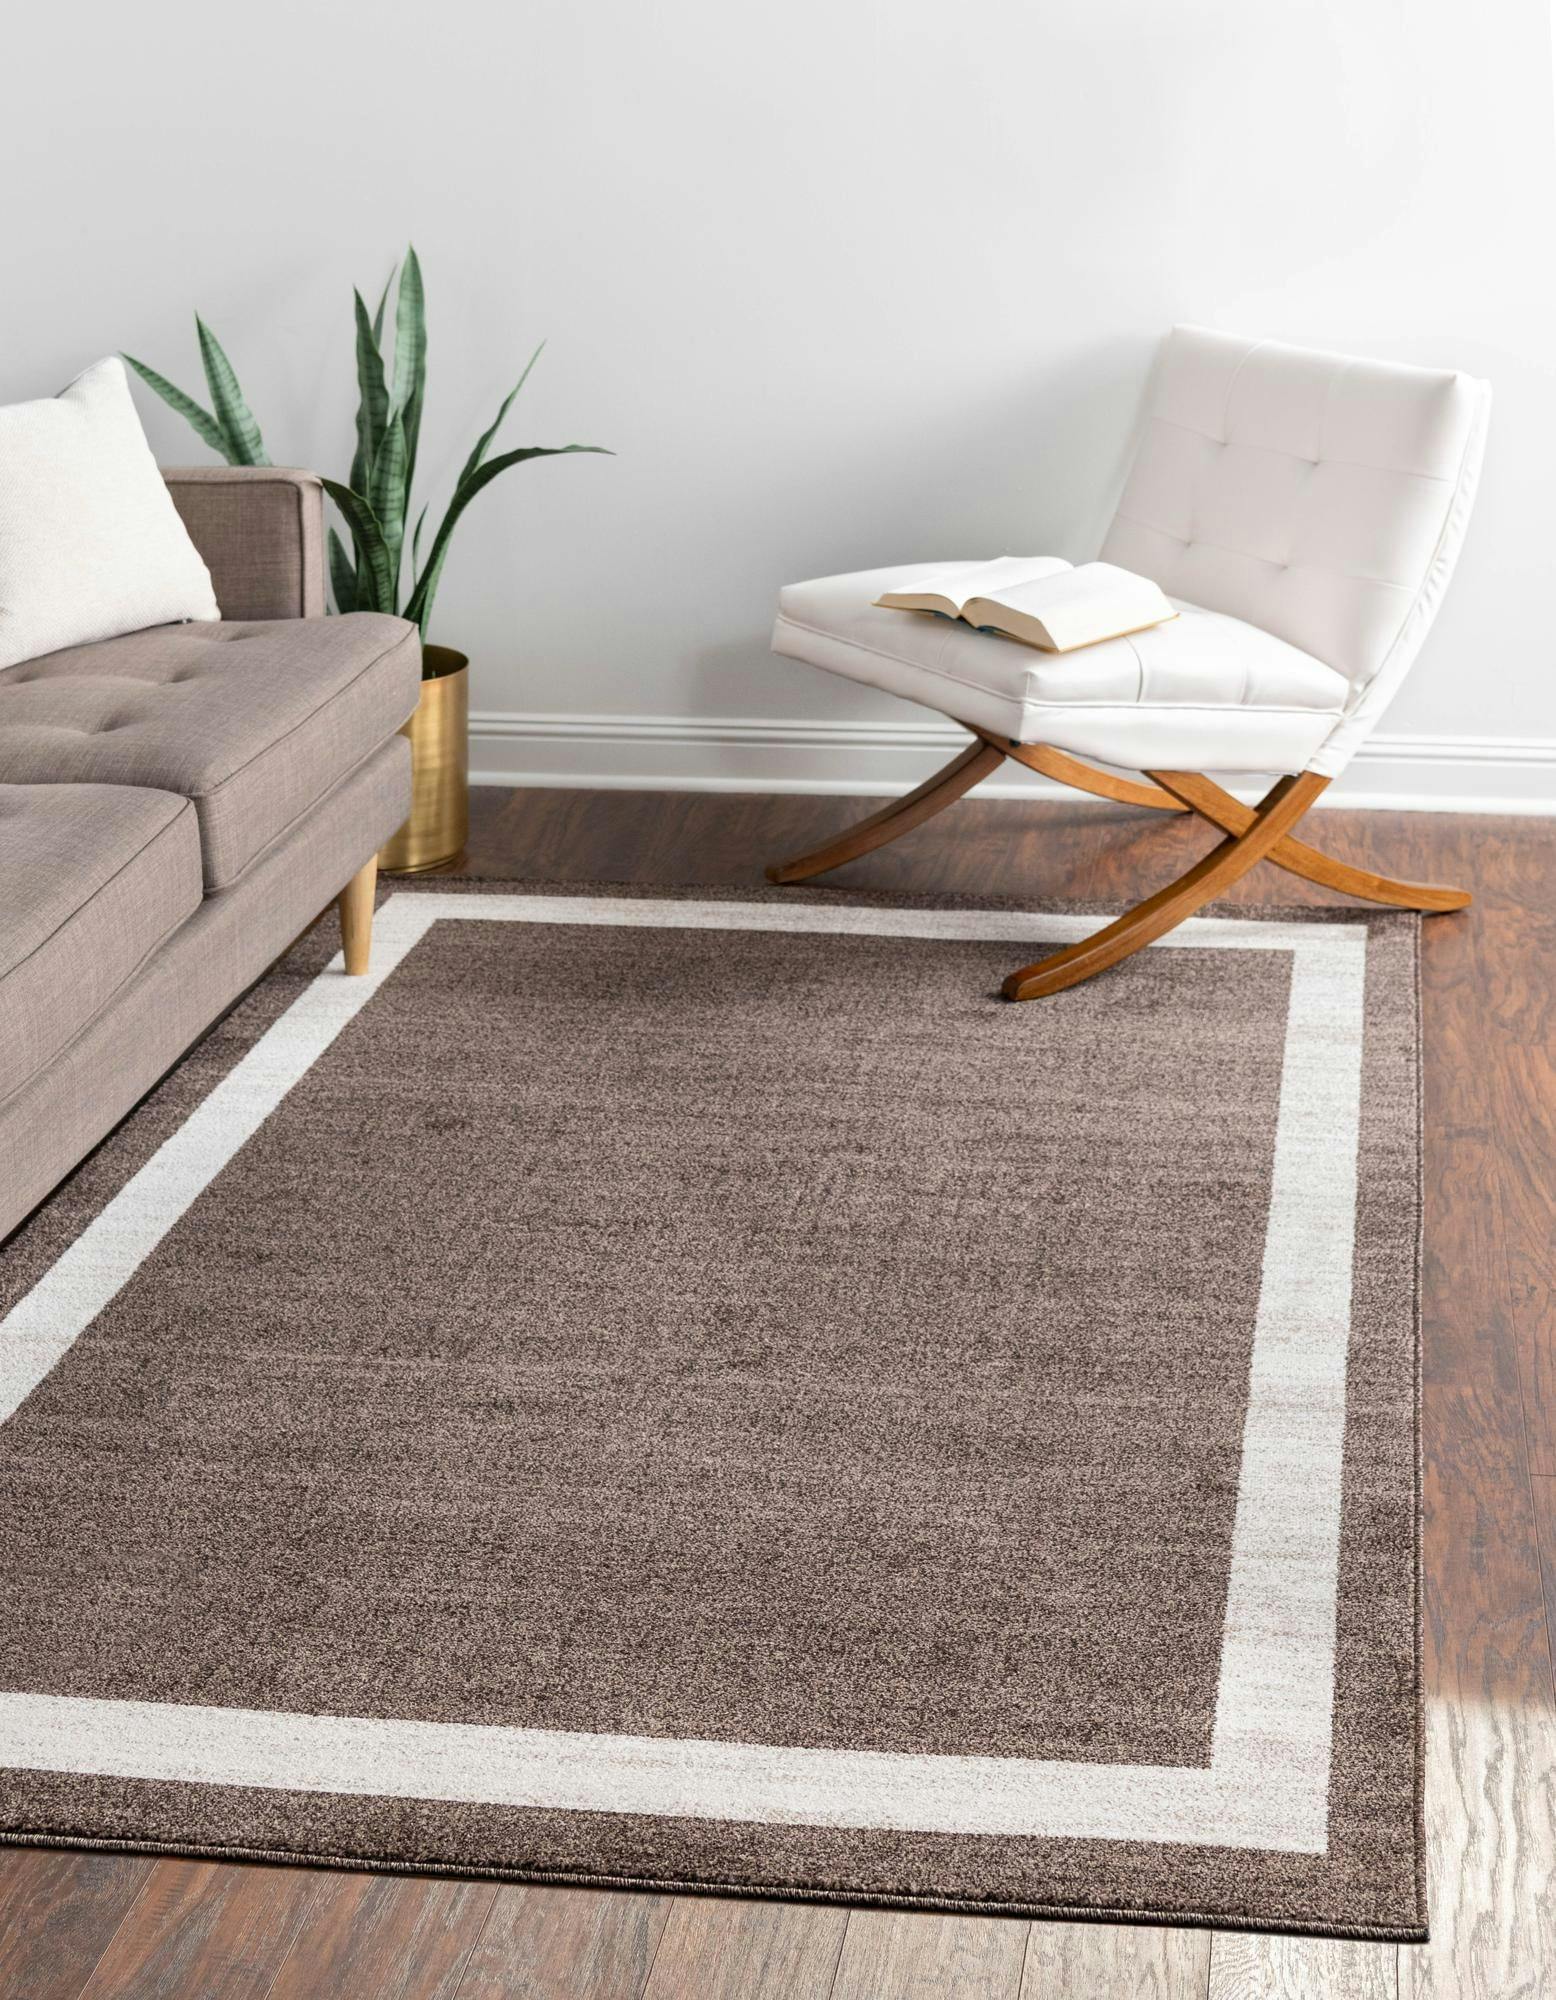 Reversible Tufted Spot Rug in Brown/Ivory, Easy Care Synthetic Material